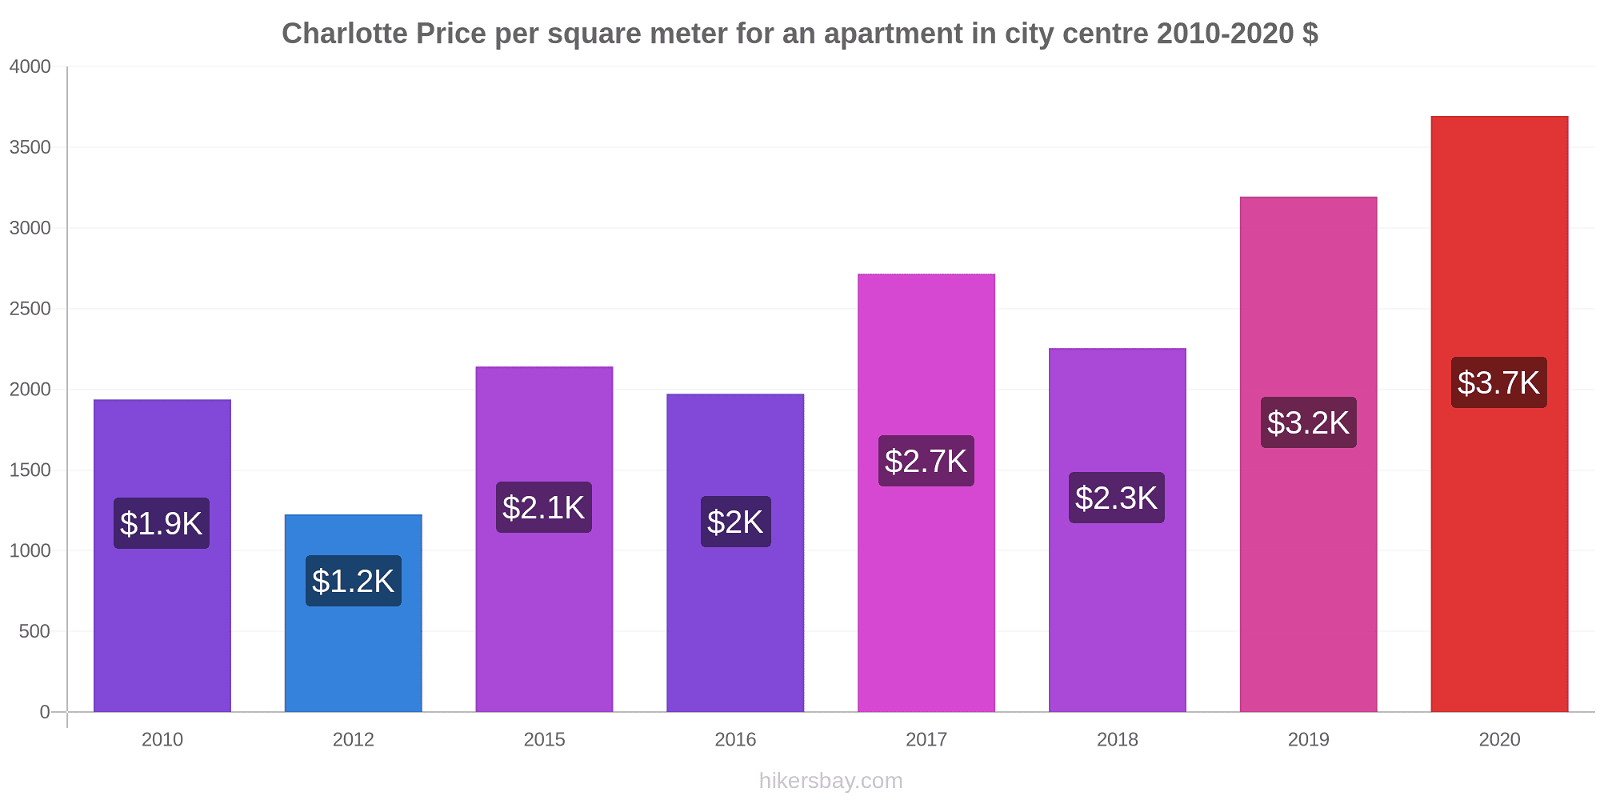 Charlotte price changes Price per square meter for an apartment in city centre hikersbay.com